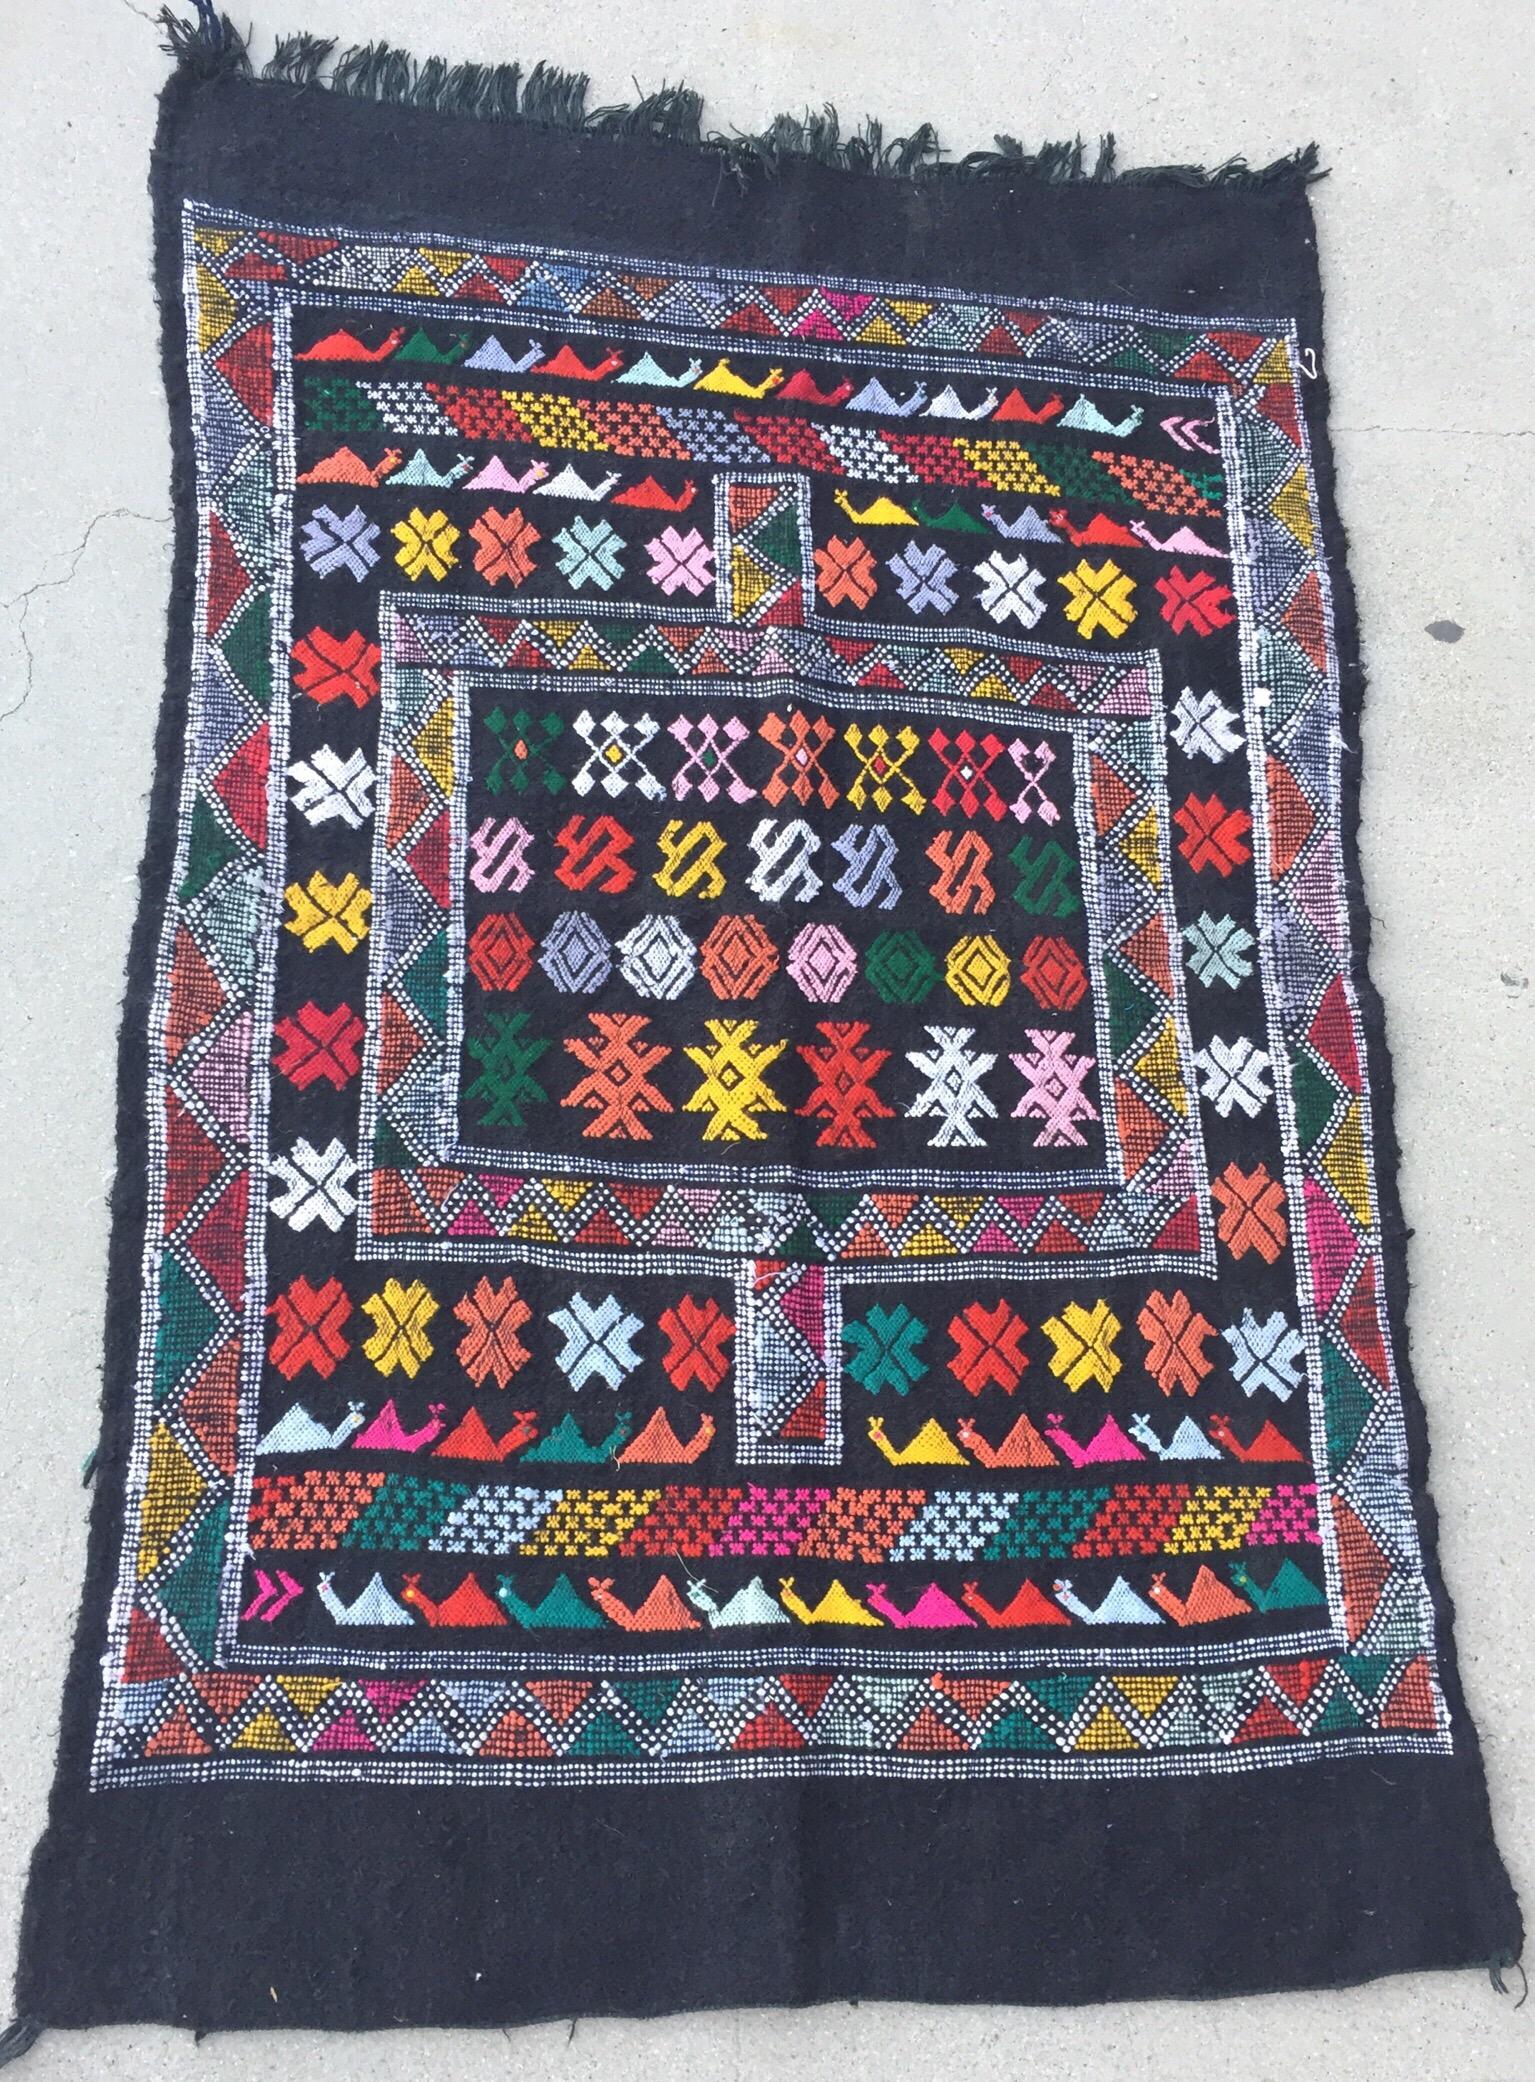 Moroccan vintage black tribal kilim rug, handwoven by Berber women in Morocco.Great mix of organic wo and cotton in black cor with flat-weaves.This kind of rug is typical of the Glaoui tribes of Morocco.Naif design of kamels and geometric